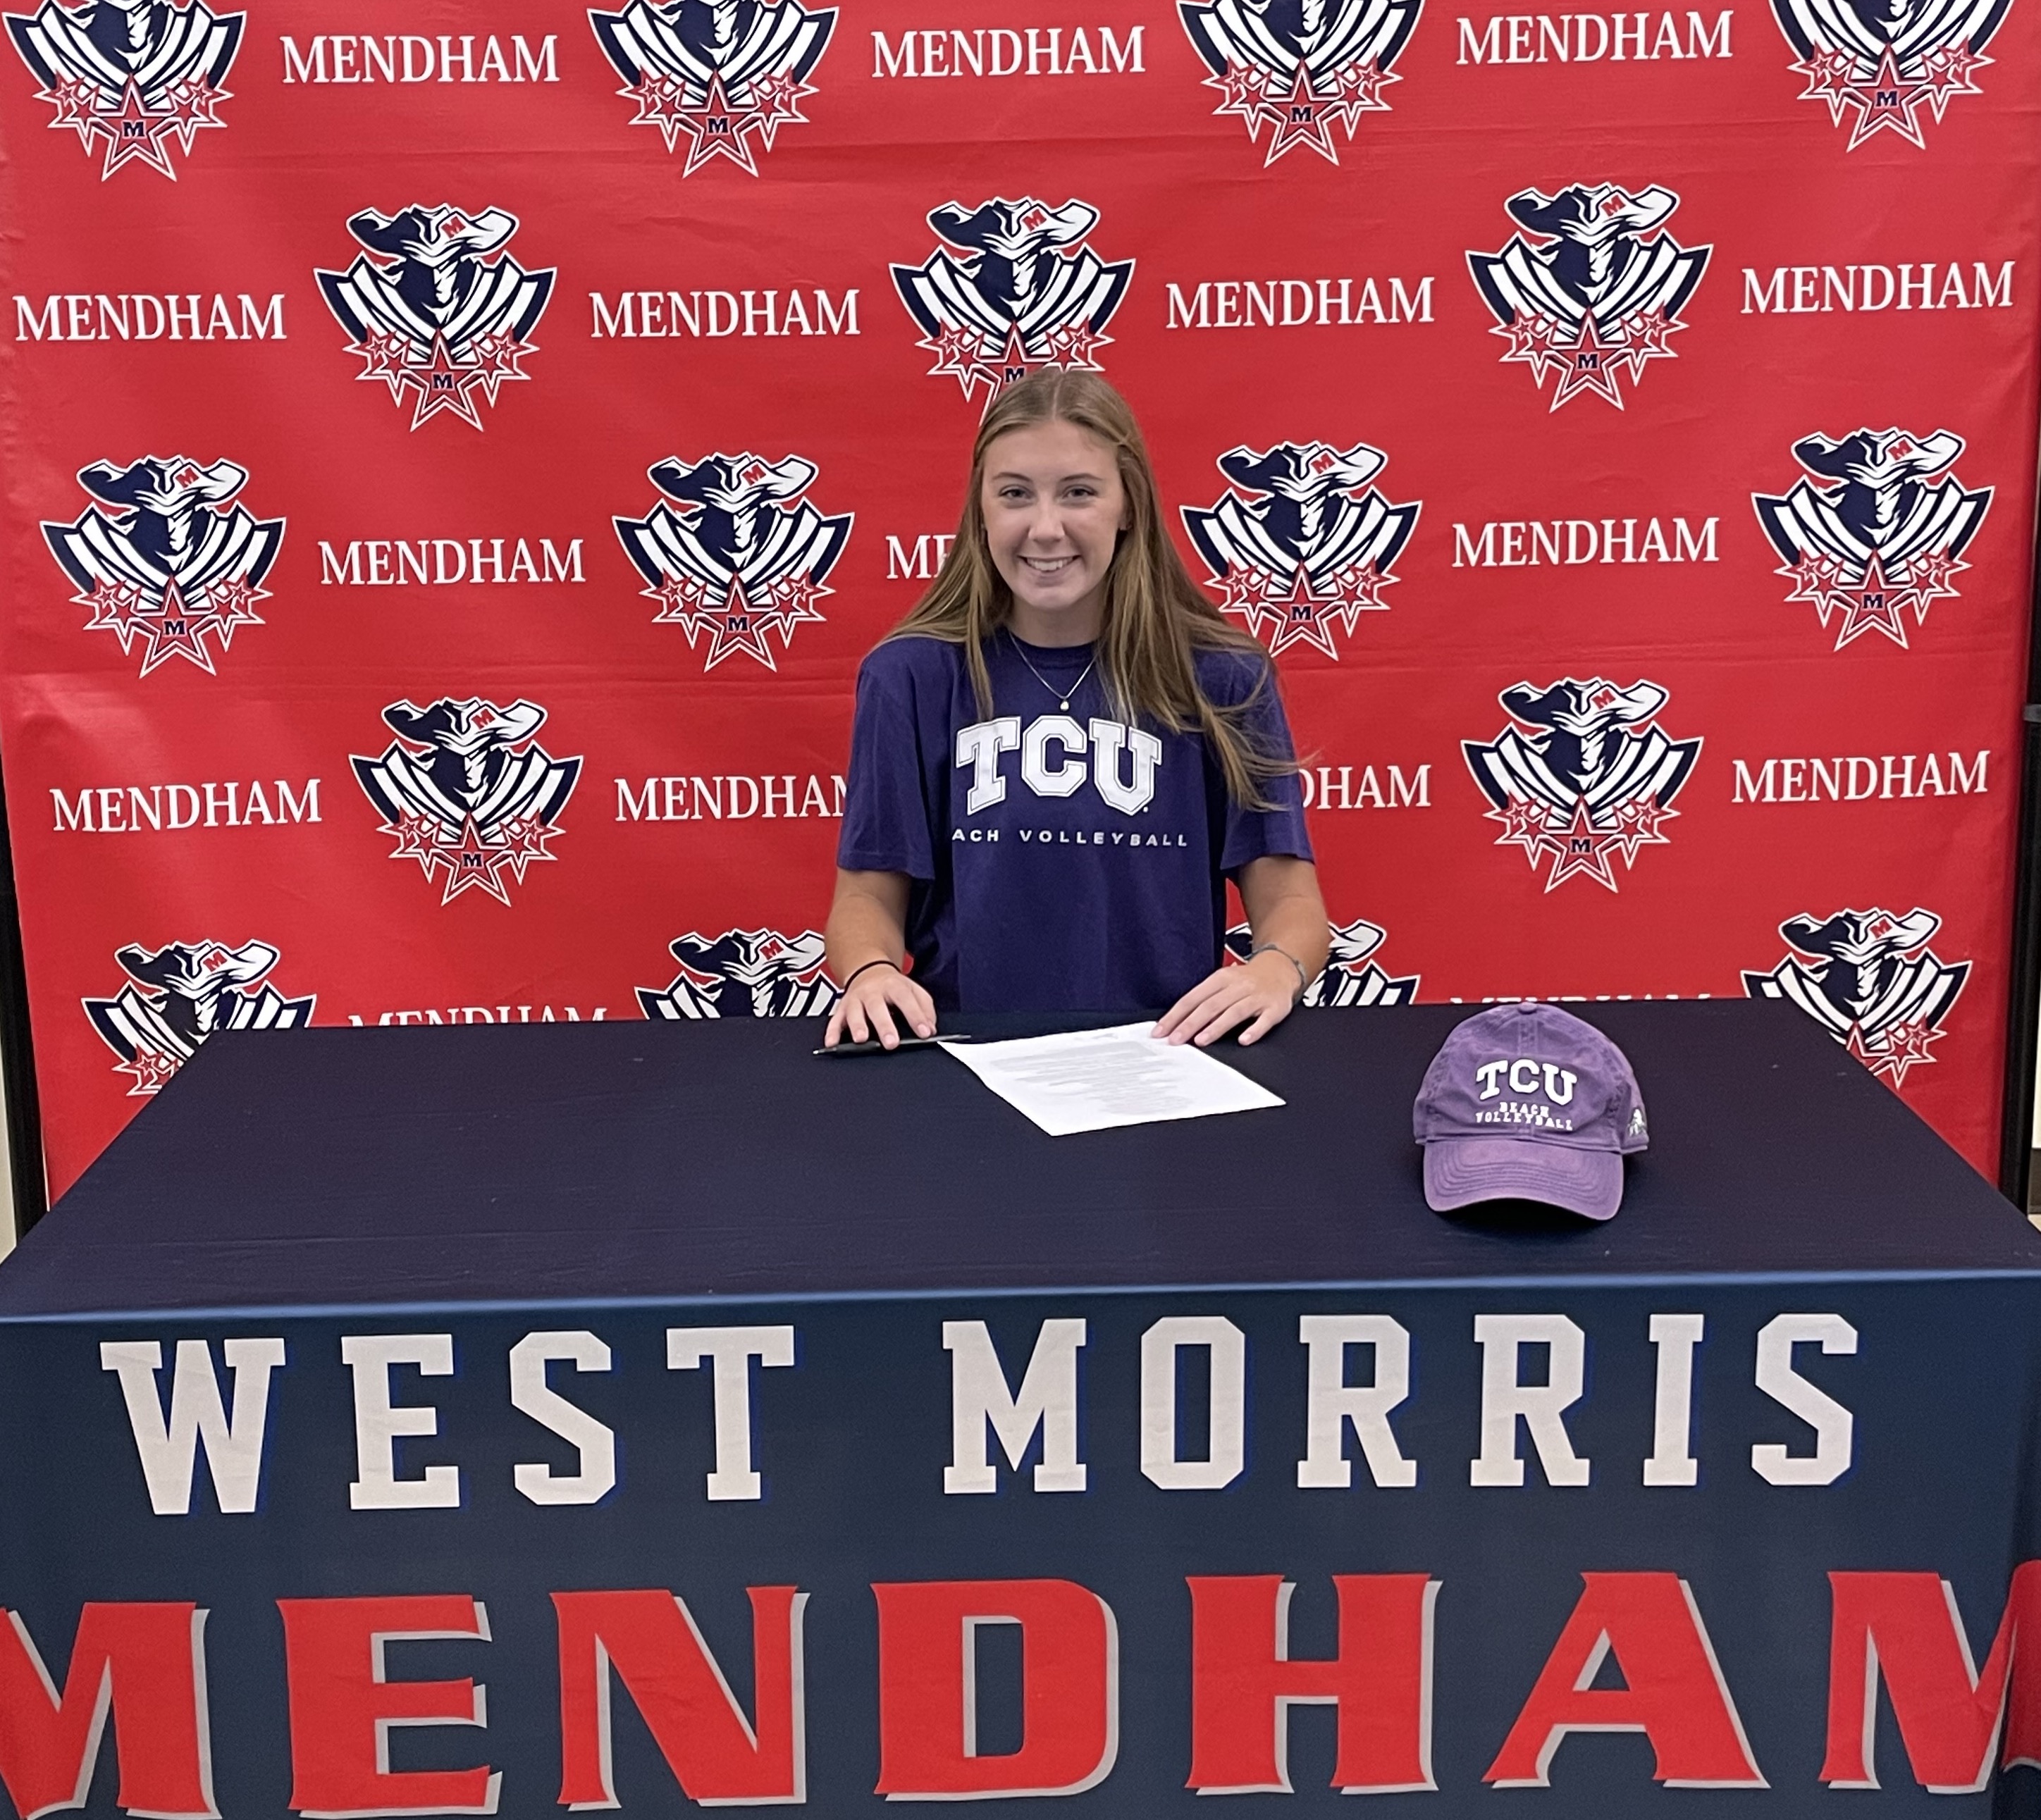 Sarah Wilcock of Mendham signs her National Letter of Intent to play beach volleyball at TCU.